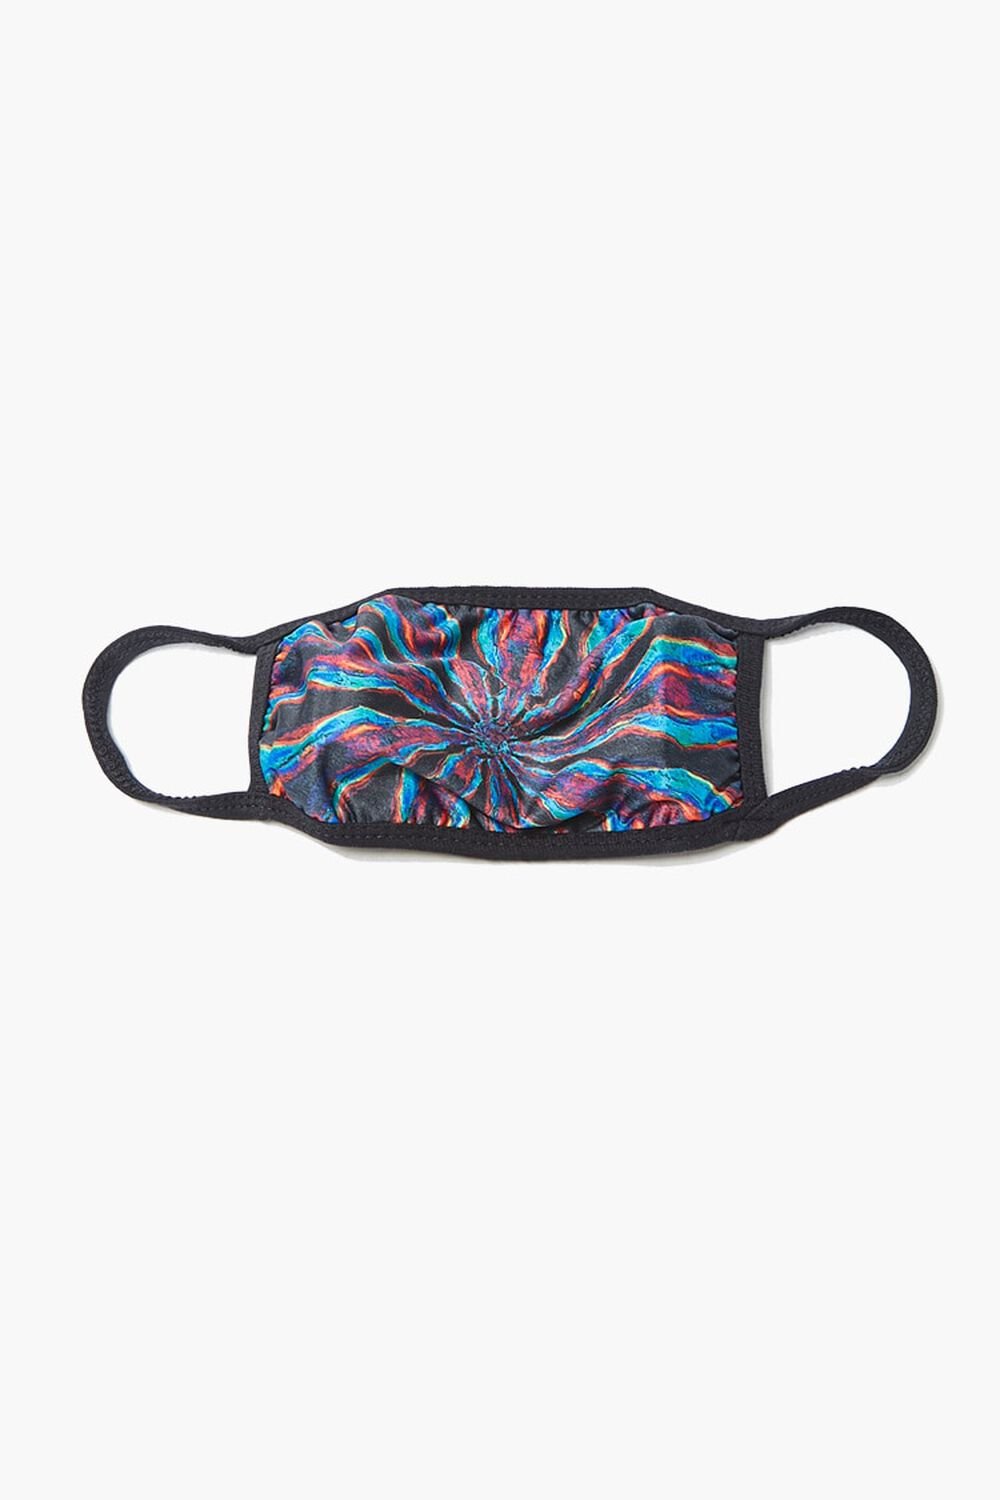 BLACK/MULTI Abstract Face Mask, image 1